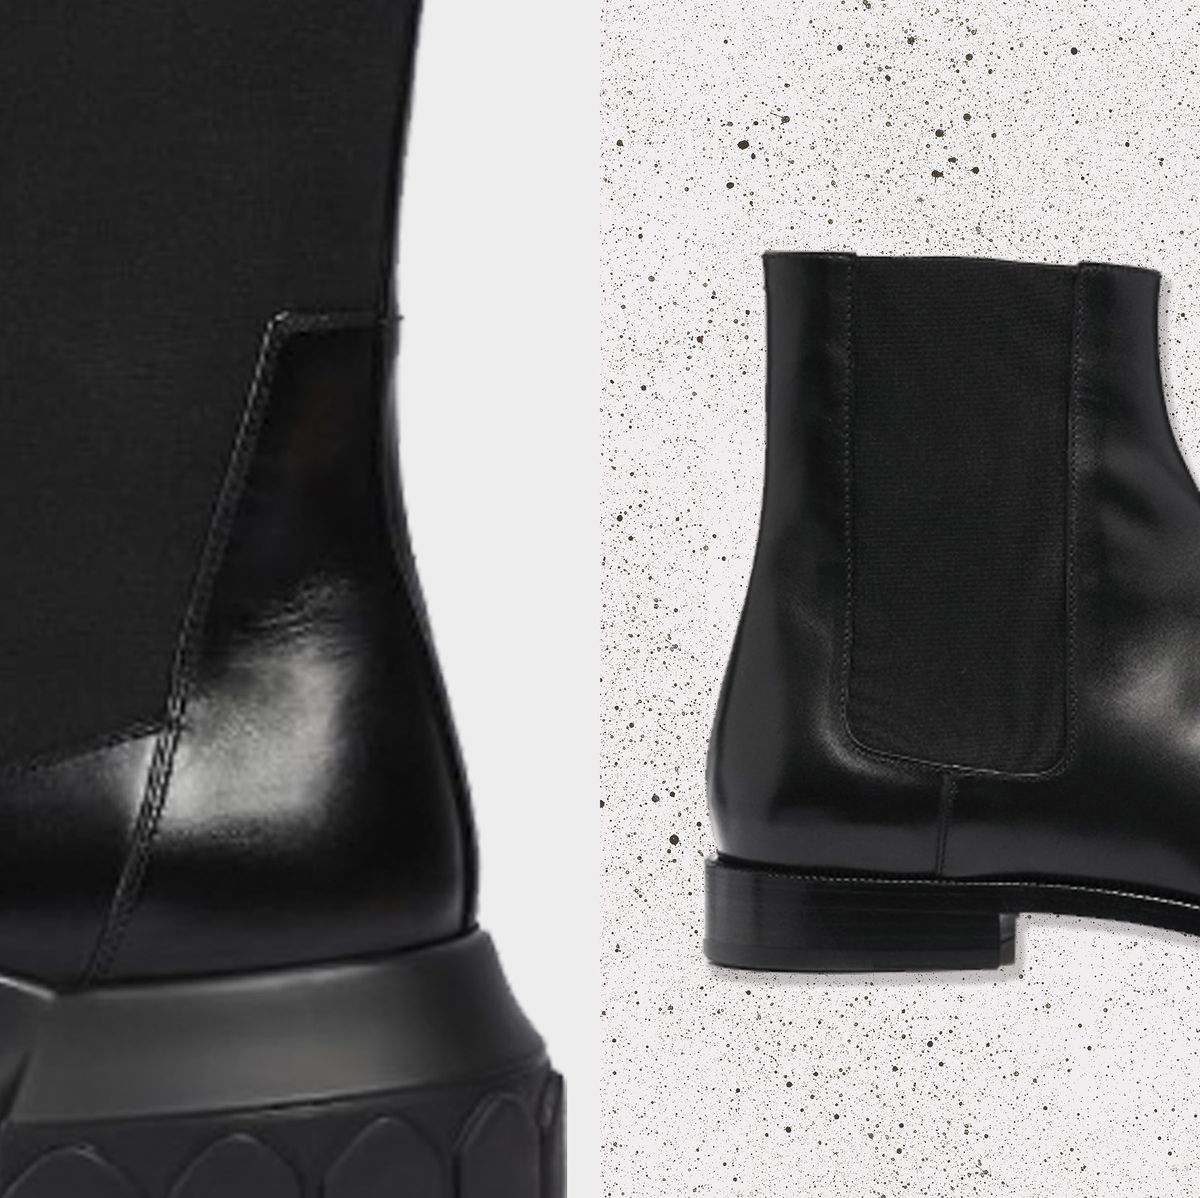 Best Chelsea Boots for Women: 10 Options for Any Budget and Style